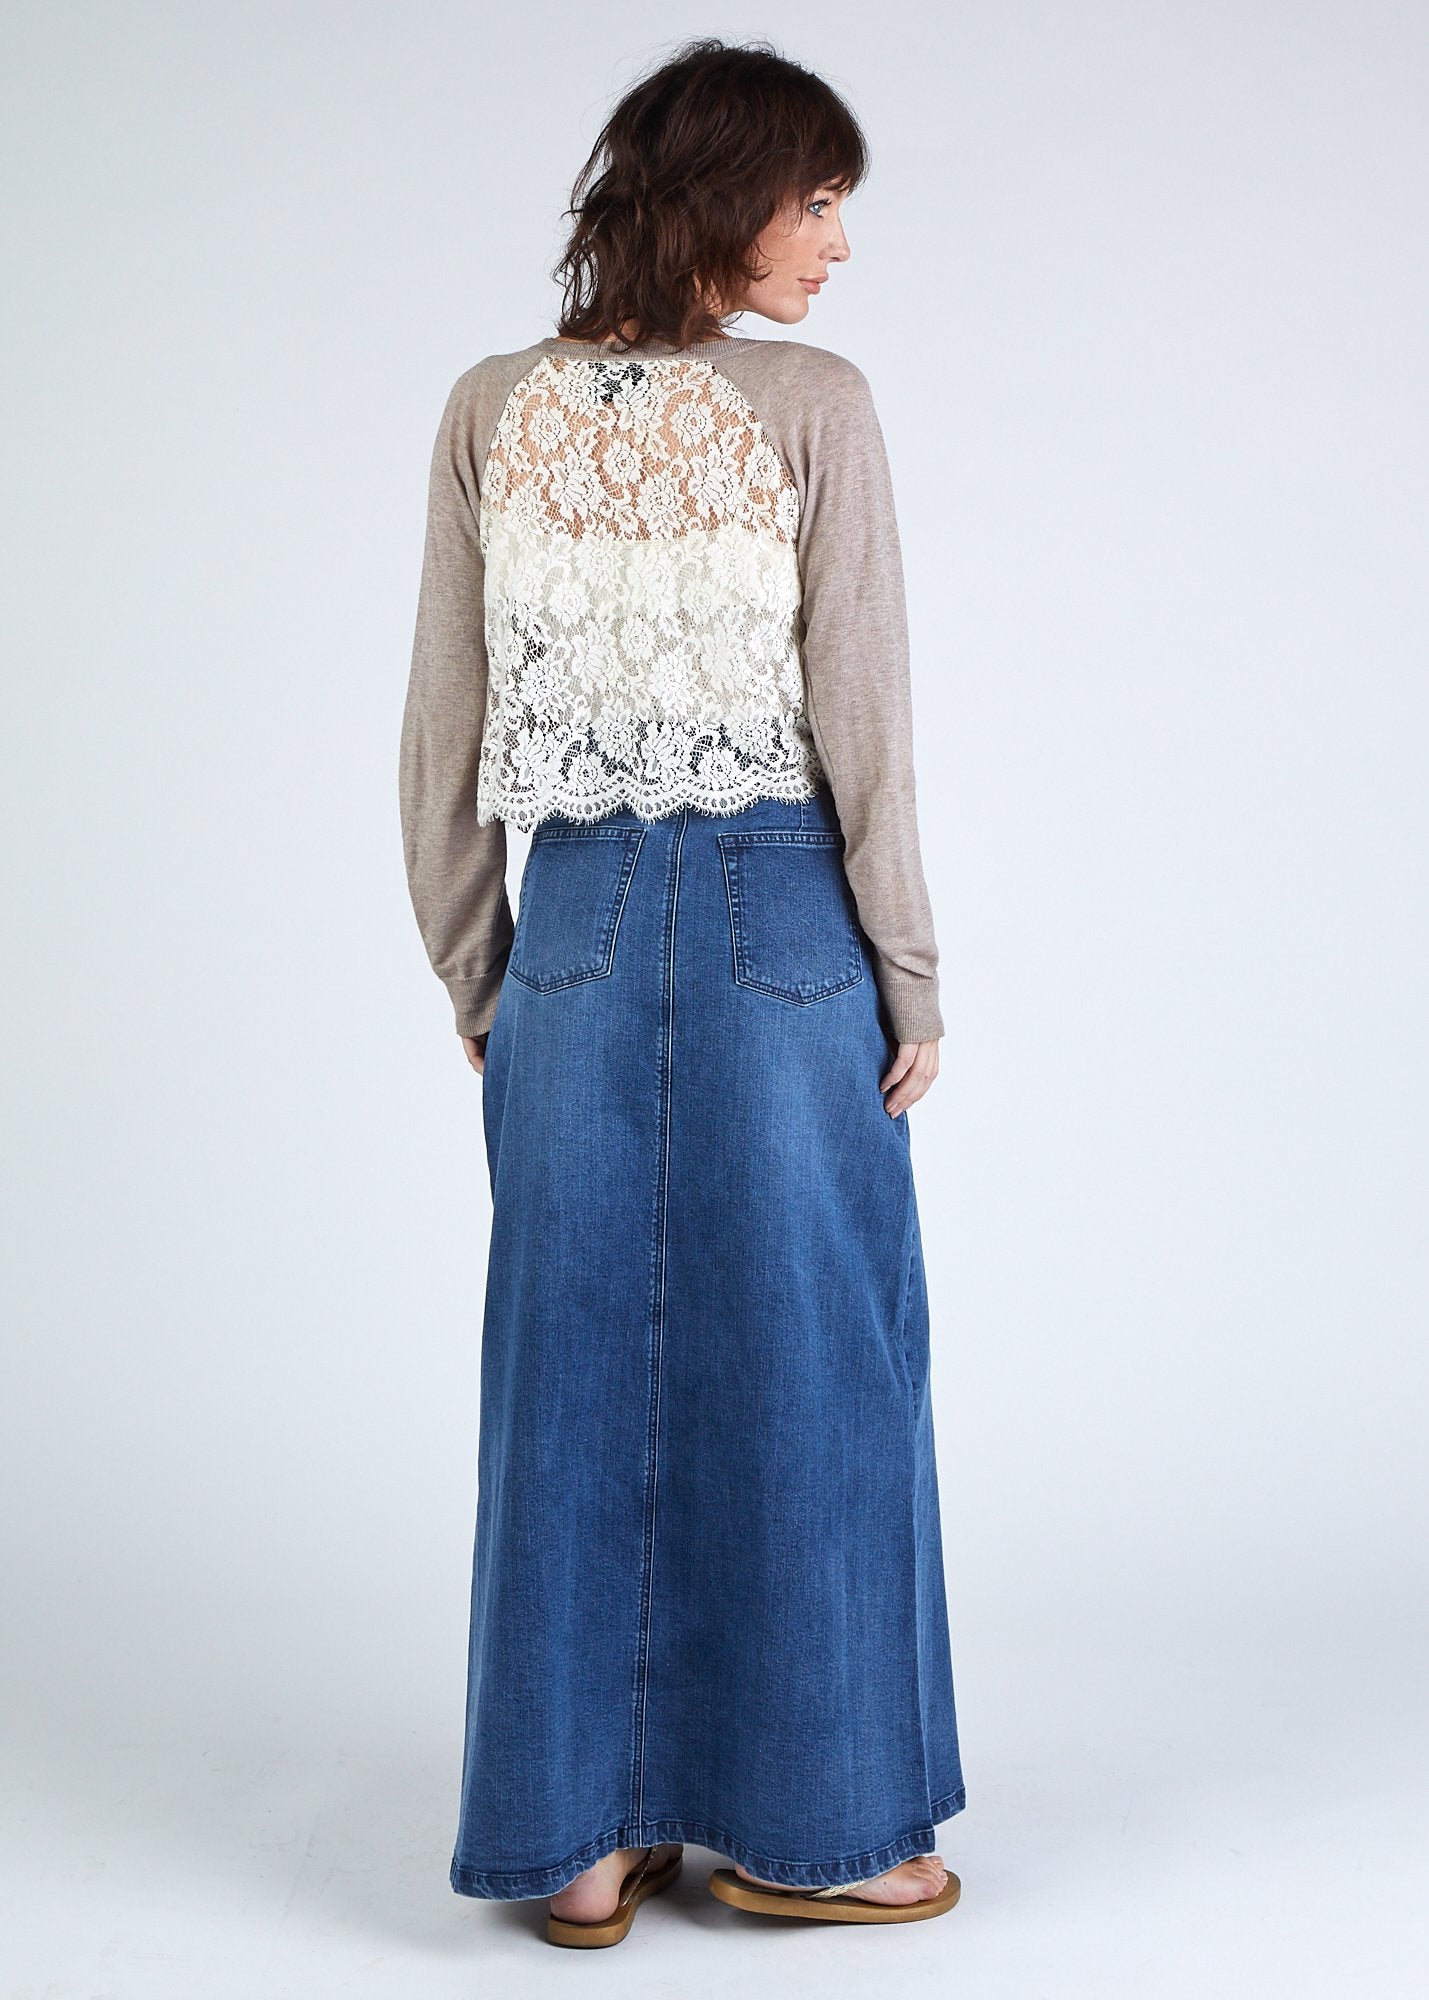 Full length rear view of organic cotton maxi denim skirt with view of back pockets and elegant silhouette.